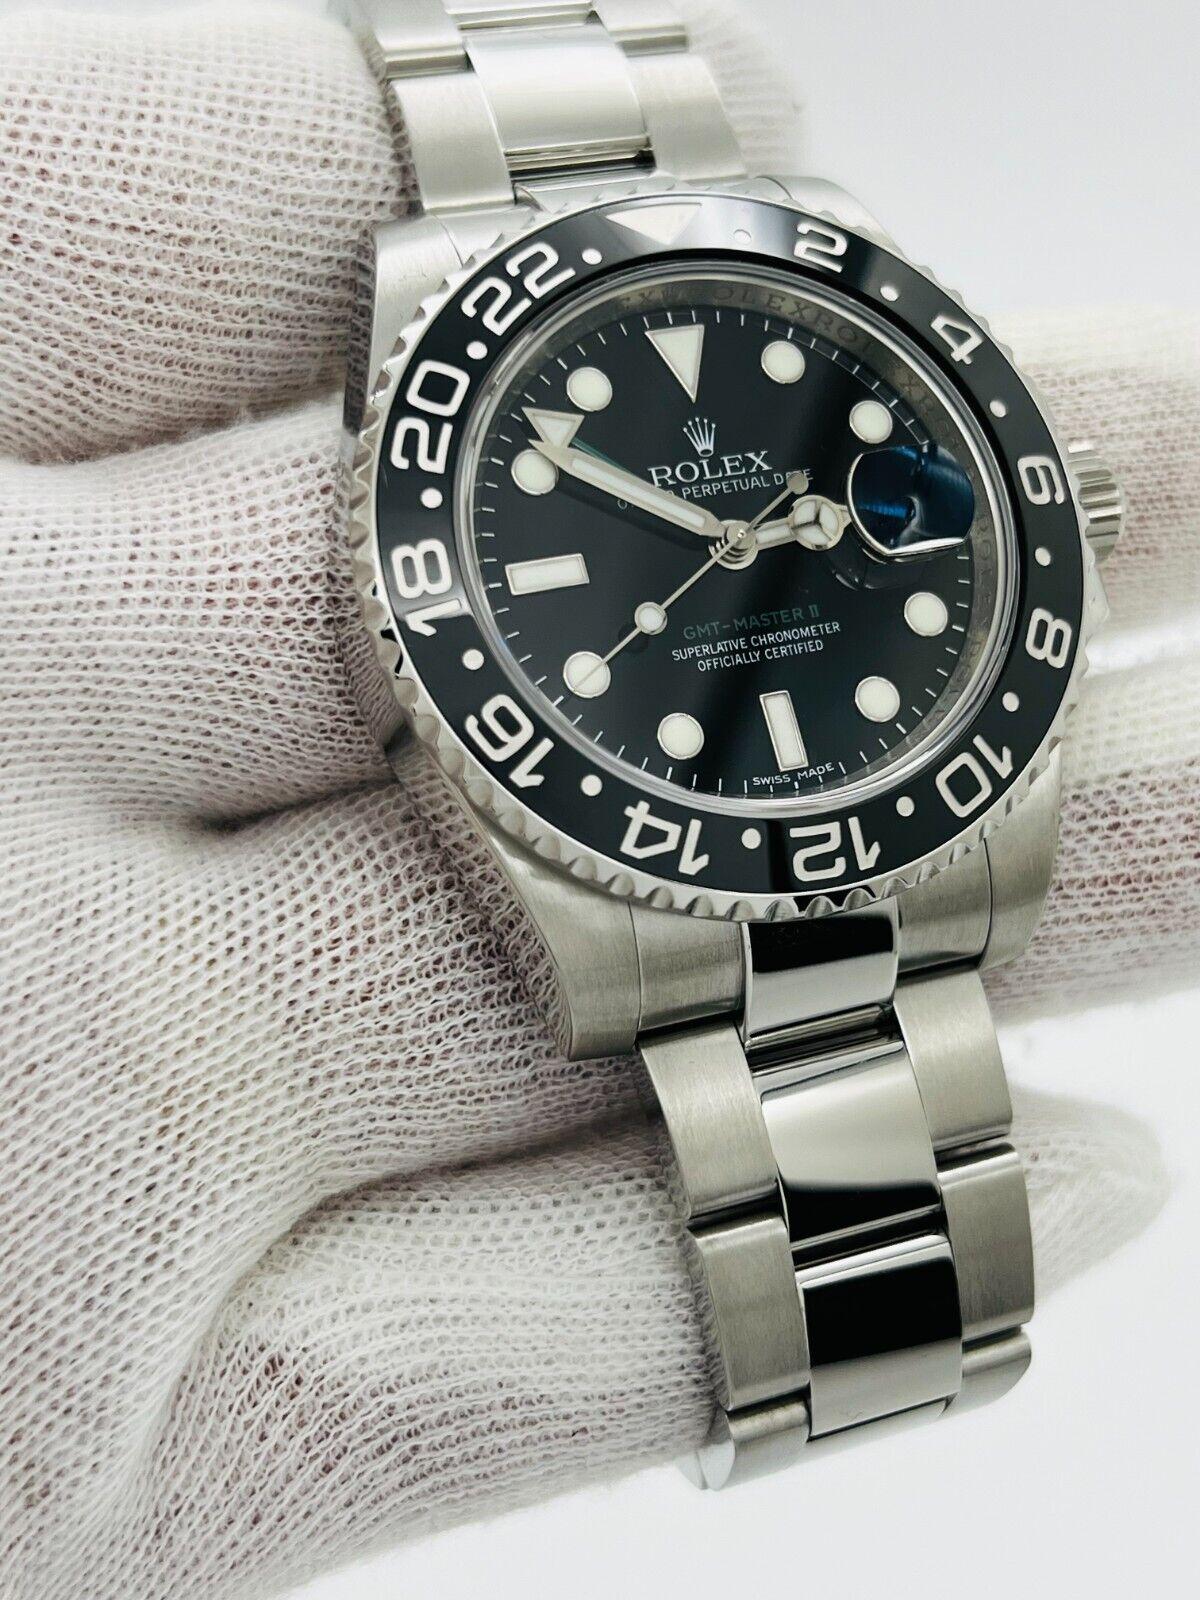  Rolex 116710 GMT Master II Black Ceramic Stainless Steel Box Paper 2011 For Sale 2